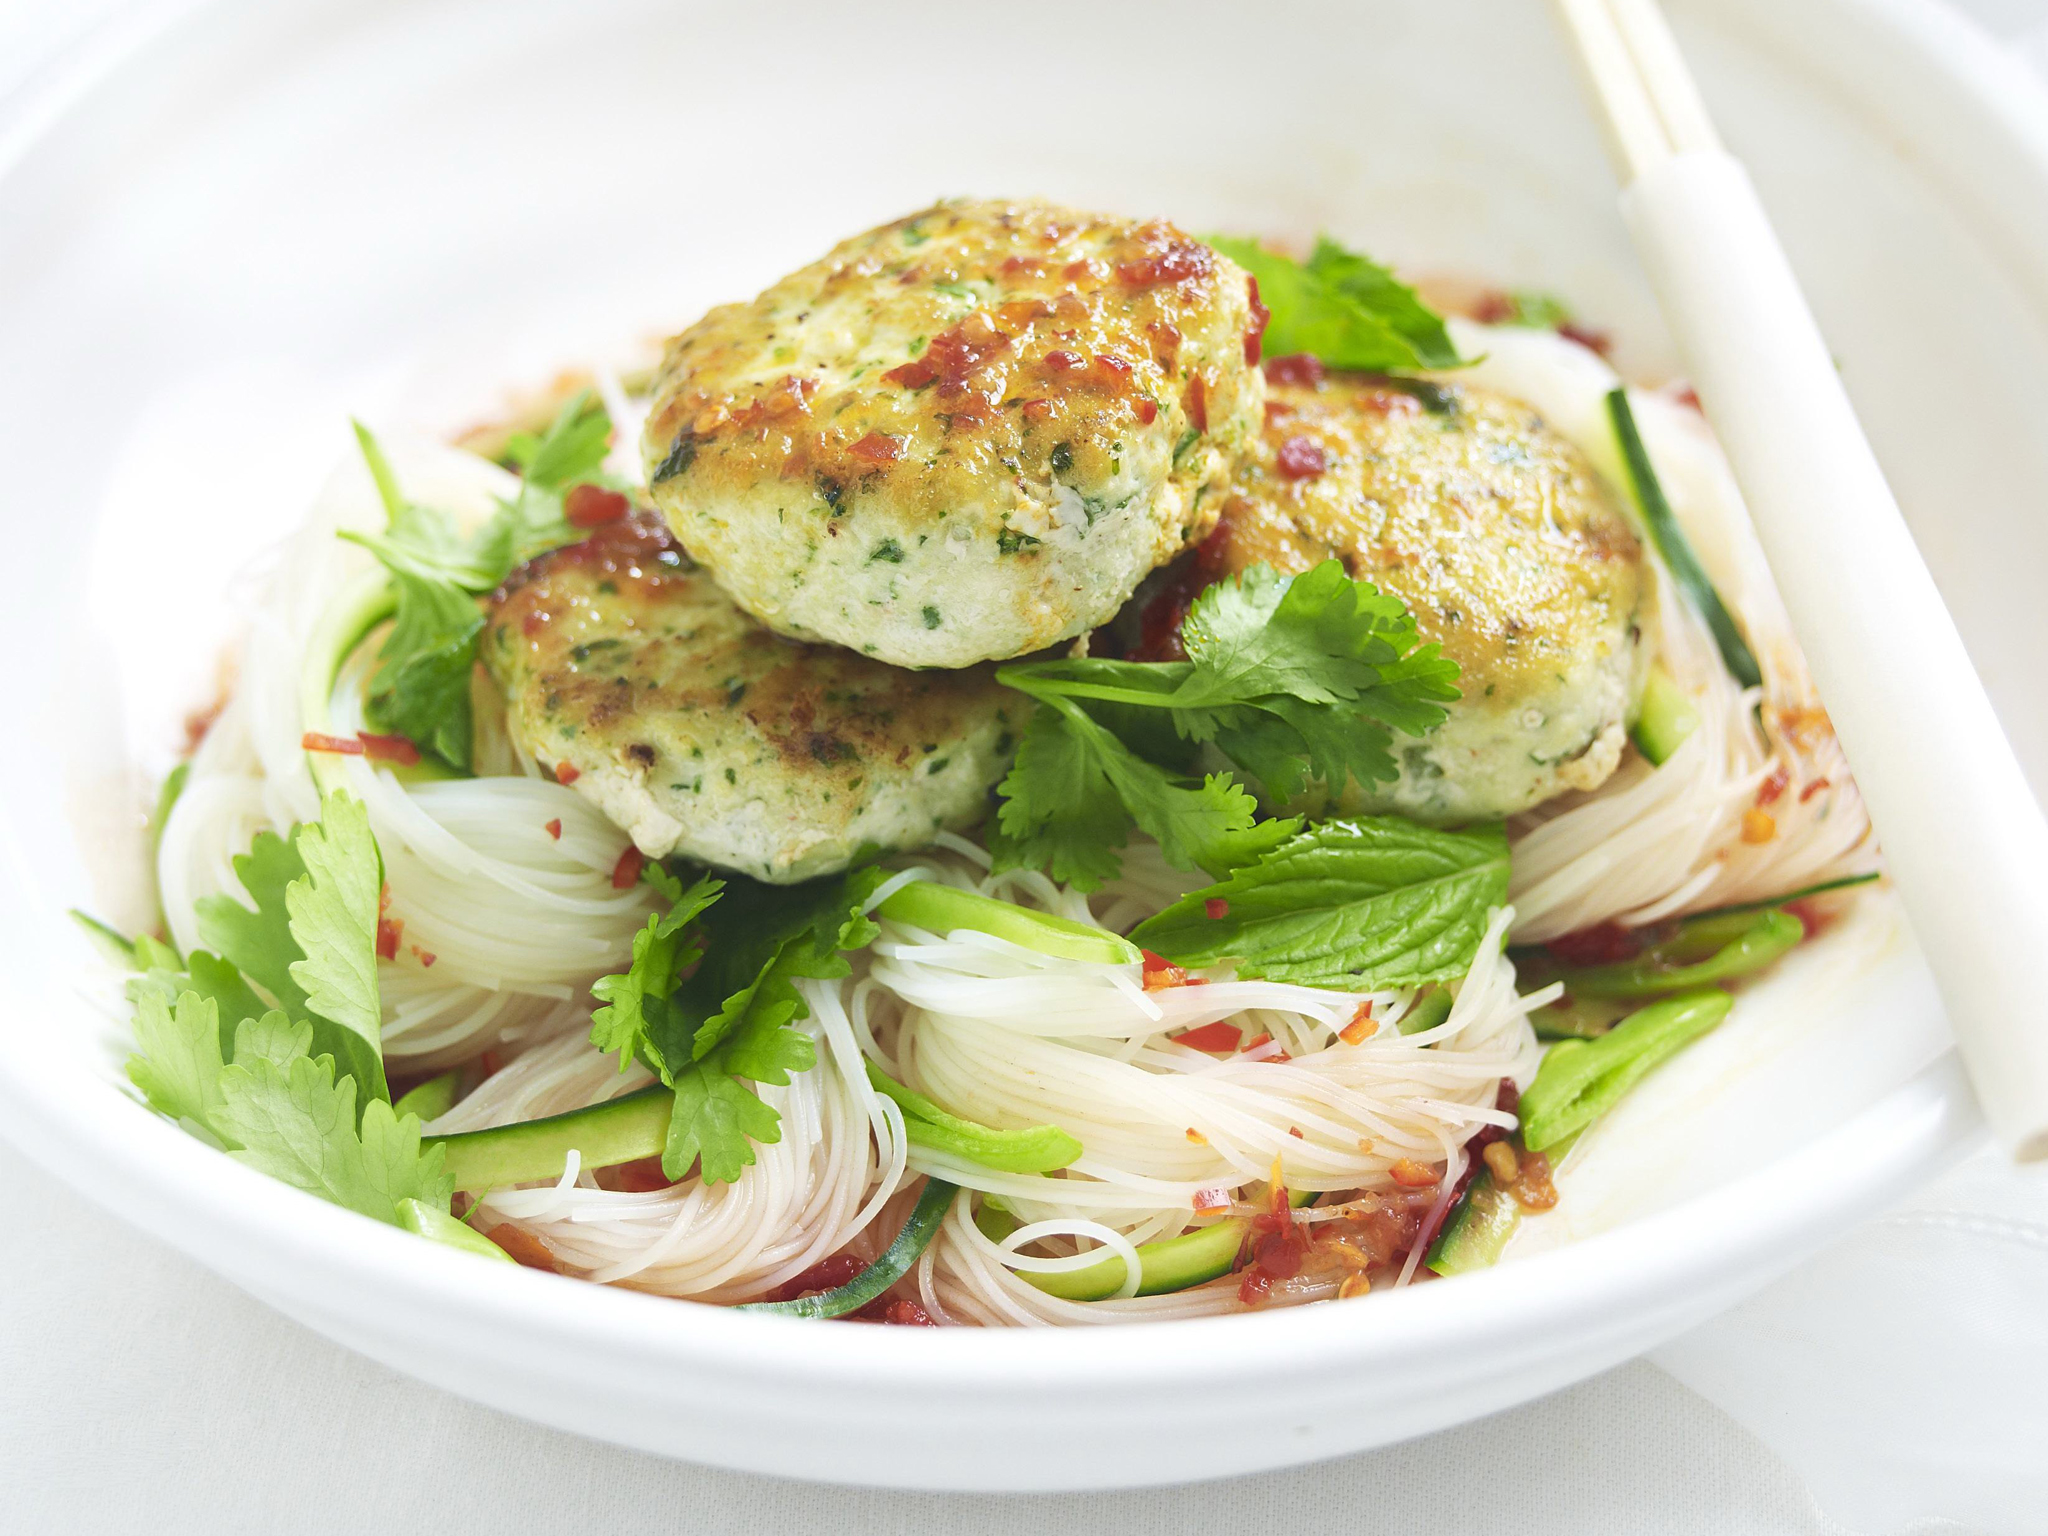 Thai fish cakes with noodle salad